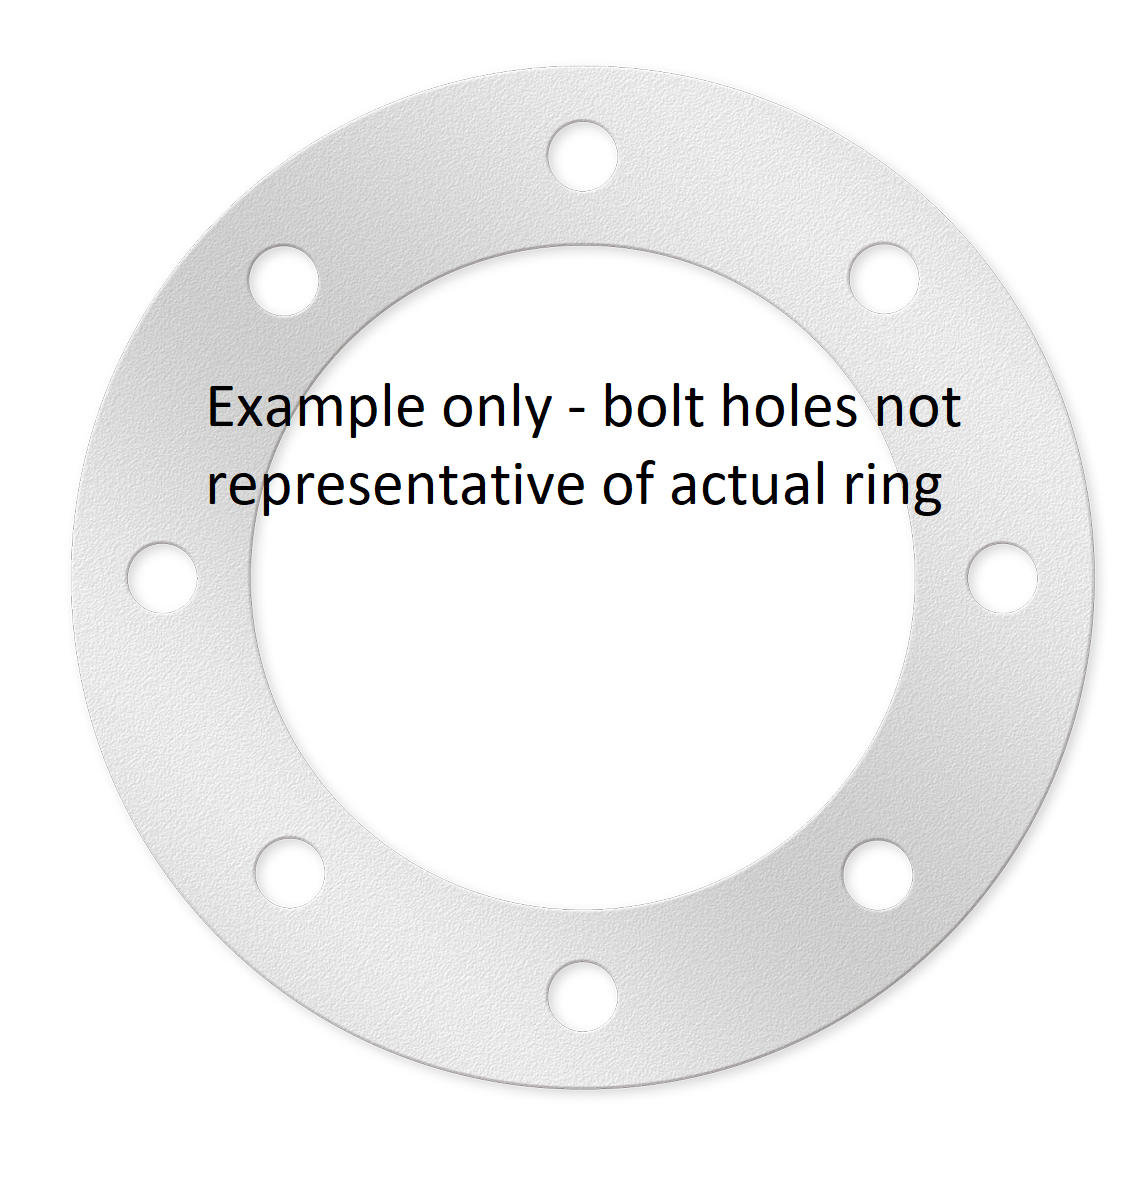 560 AS4087 B7 BACKING RING STAINLESS STEEL TO SUIT PE